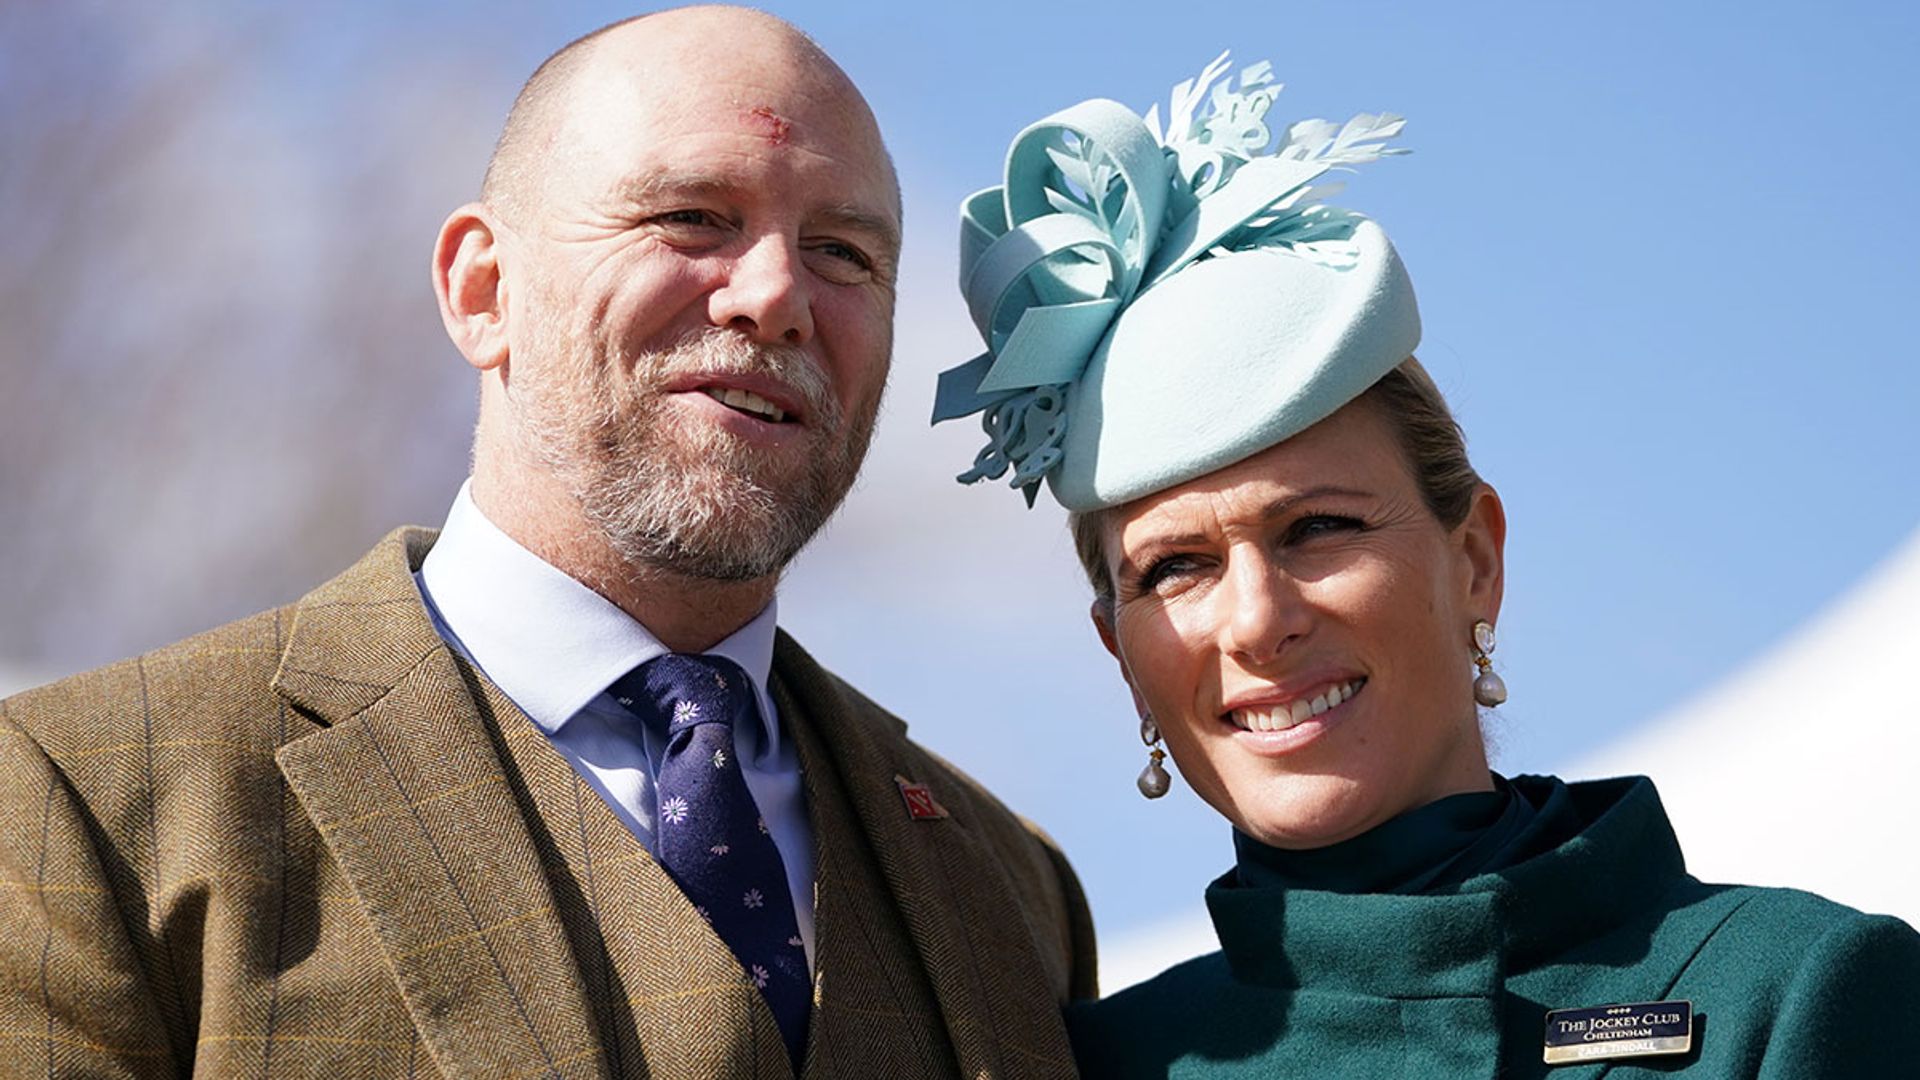 Mike Tindall shares loved-up tribute to wife Zara ahead of 41st birthday